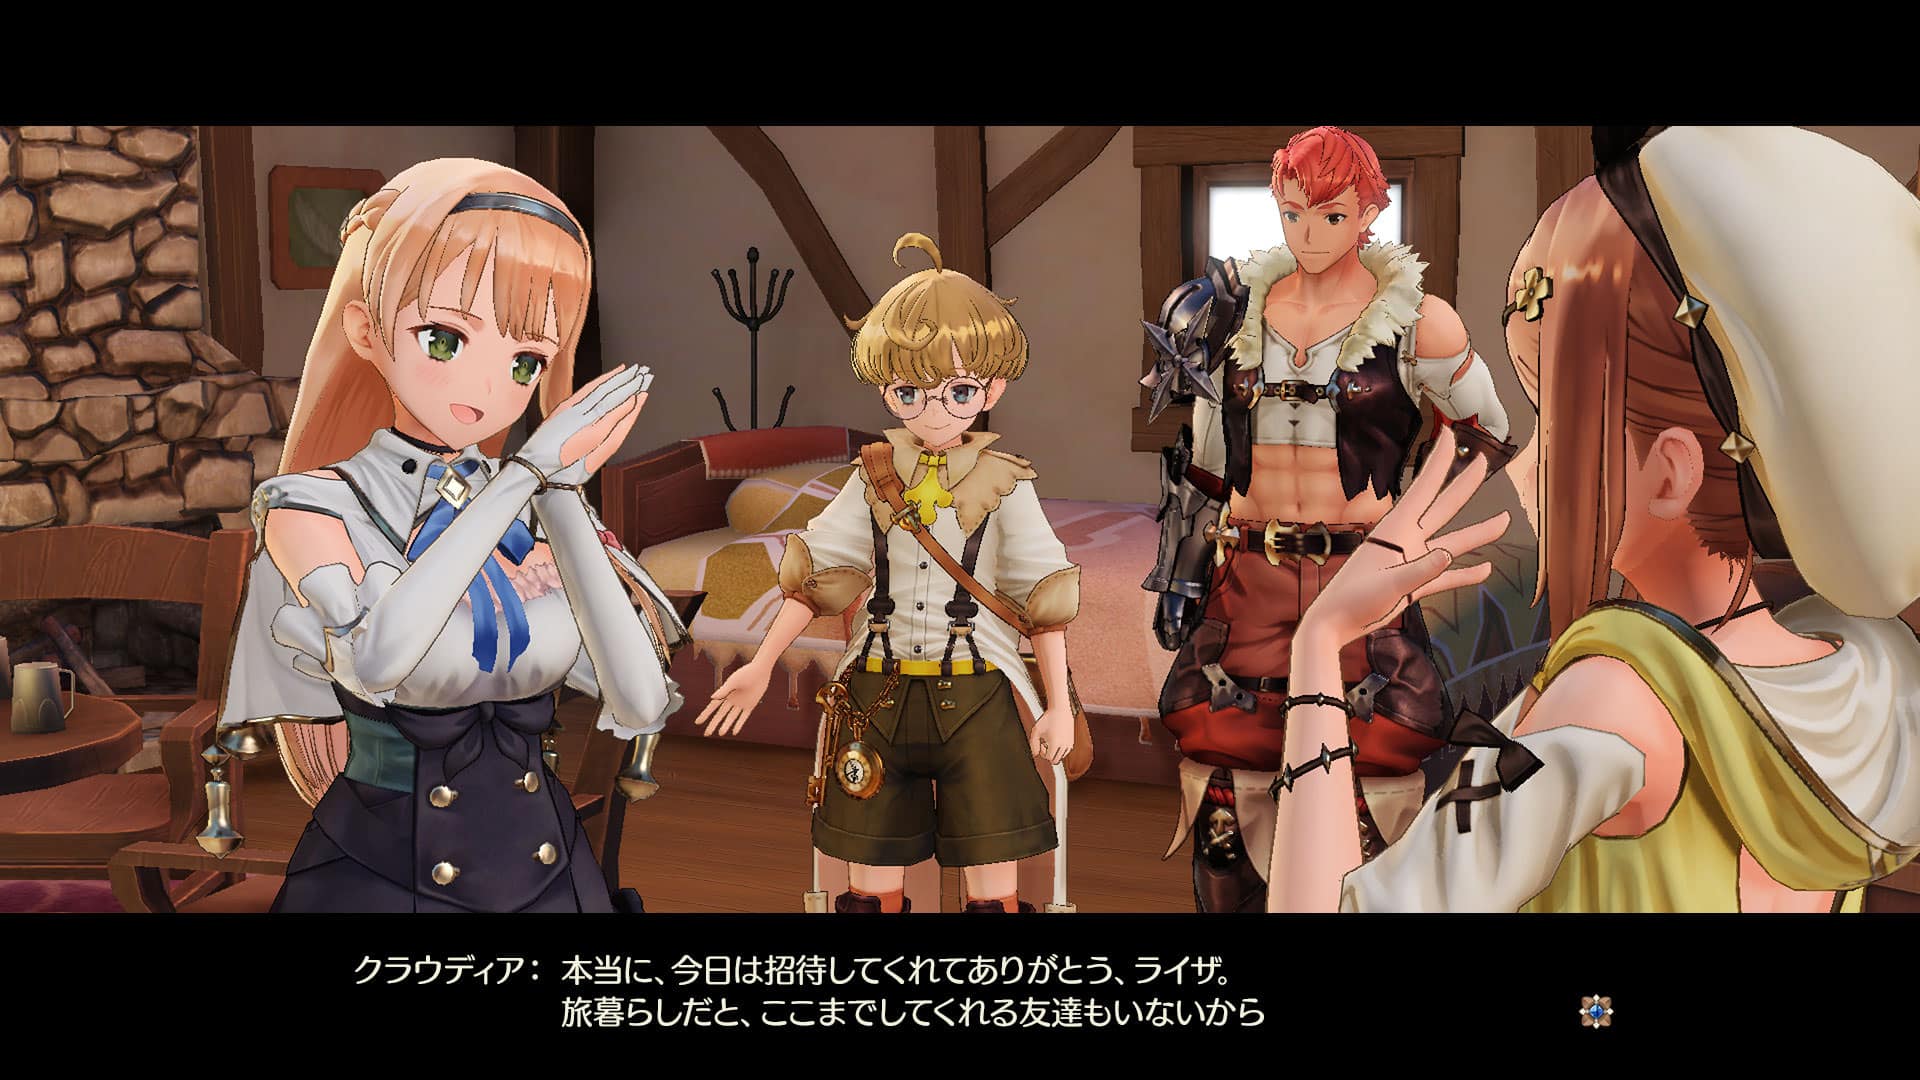 Atelier Ryza and the gang